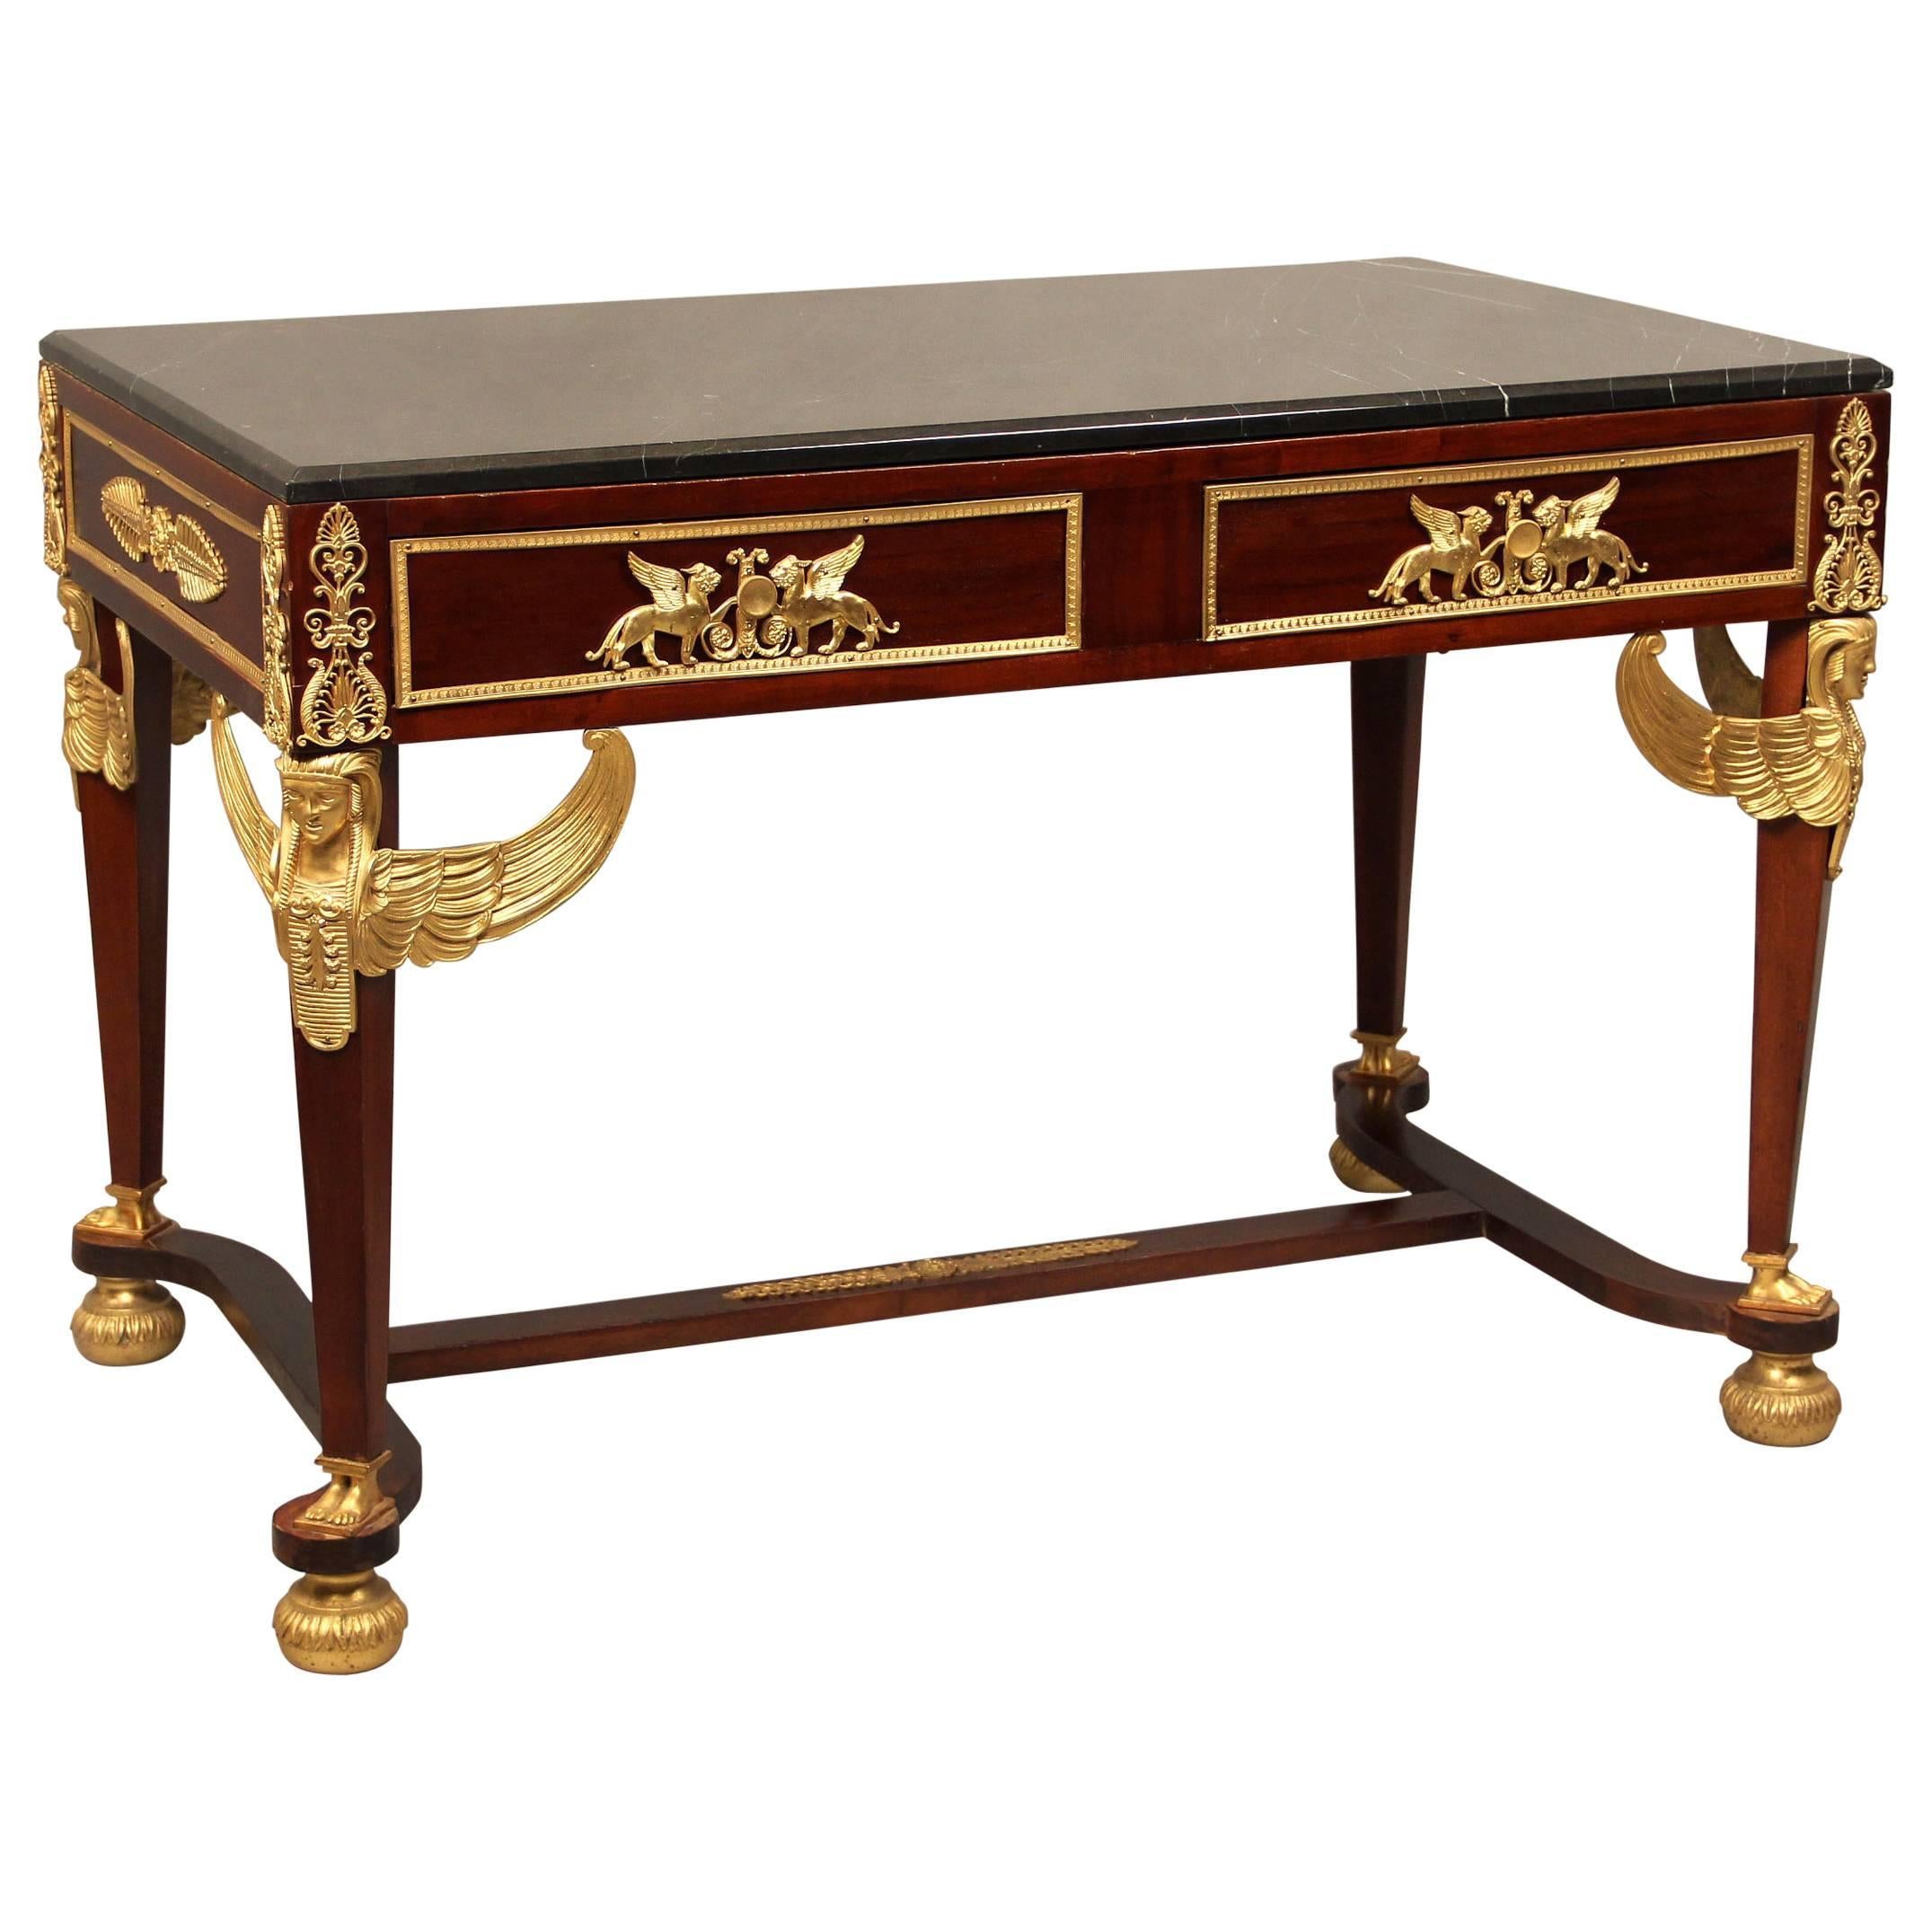 Late 19th Gilt Bronze-Mounted Center Table in the Empire Revival Style